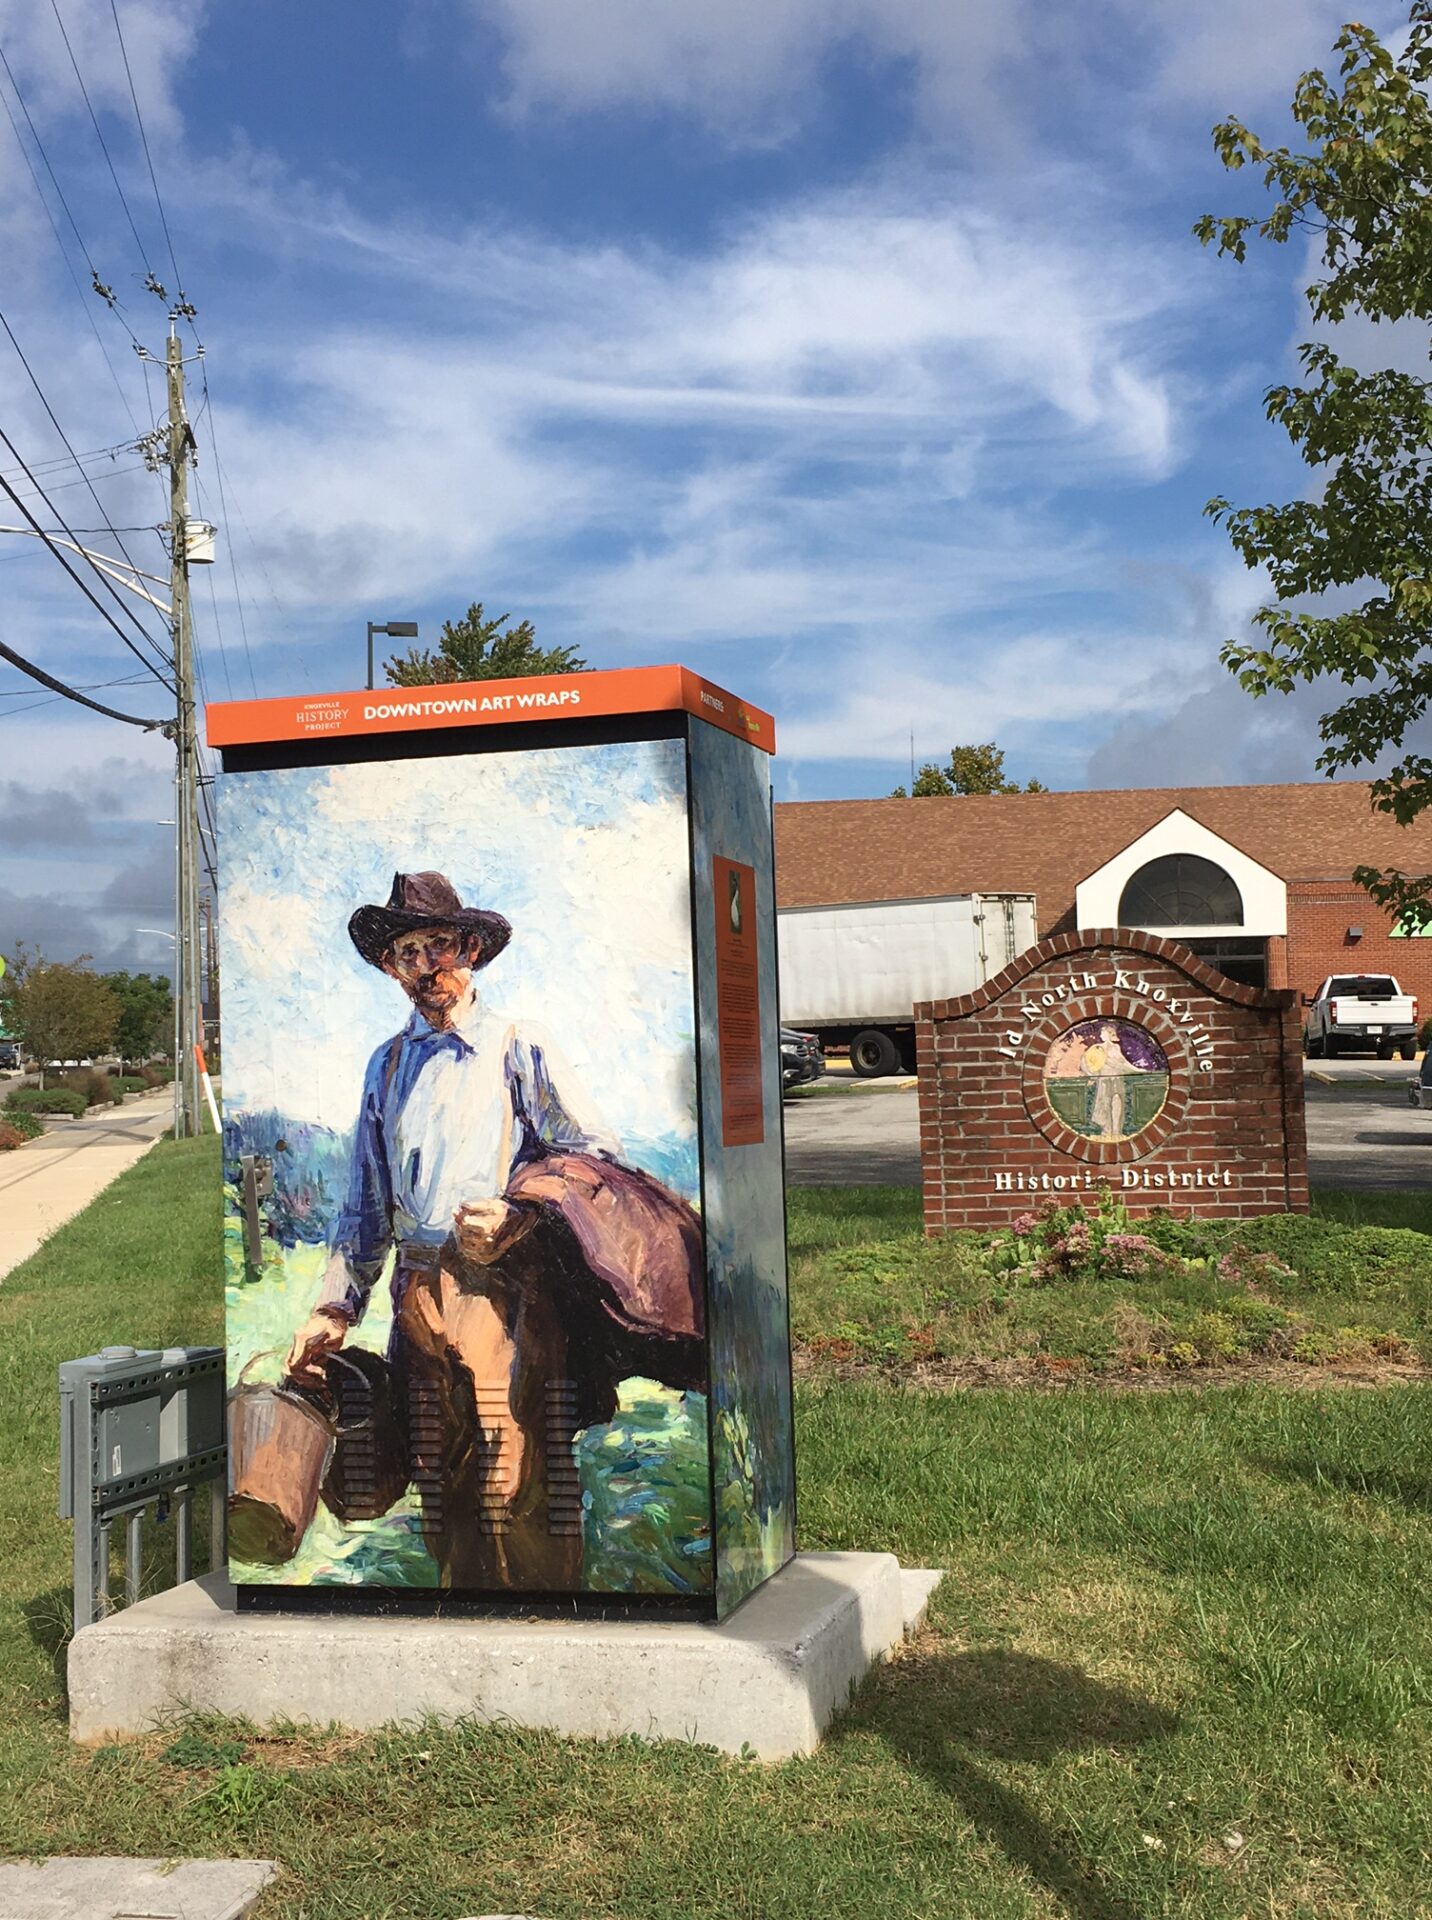 Morning Milking Time by Catherine Wiley at N. Central Street and Broadway. Sponsored by Deborah Franklin.